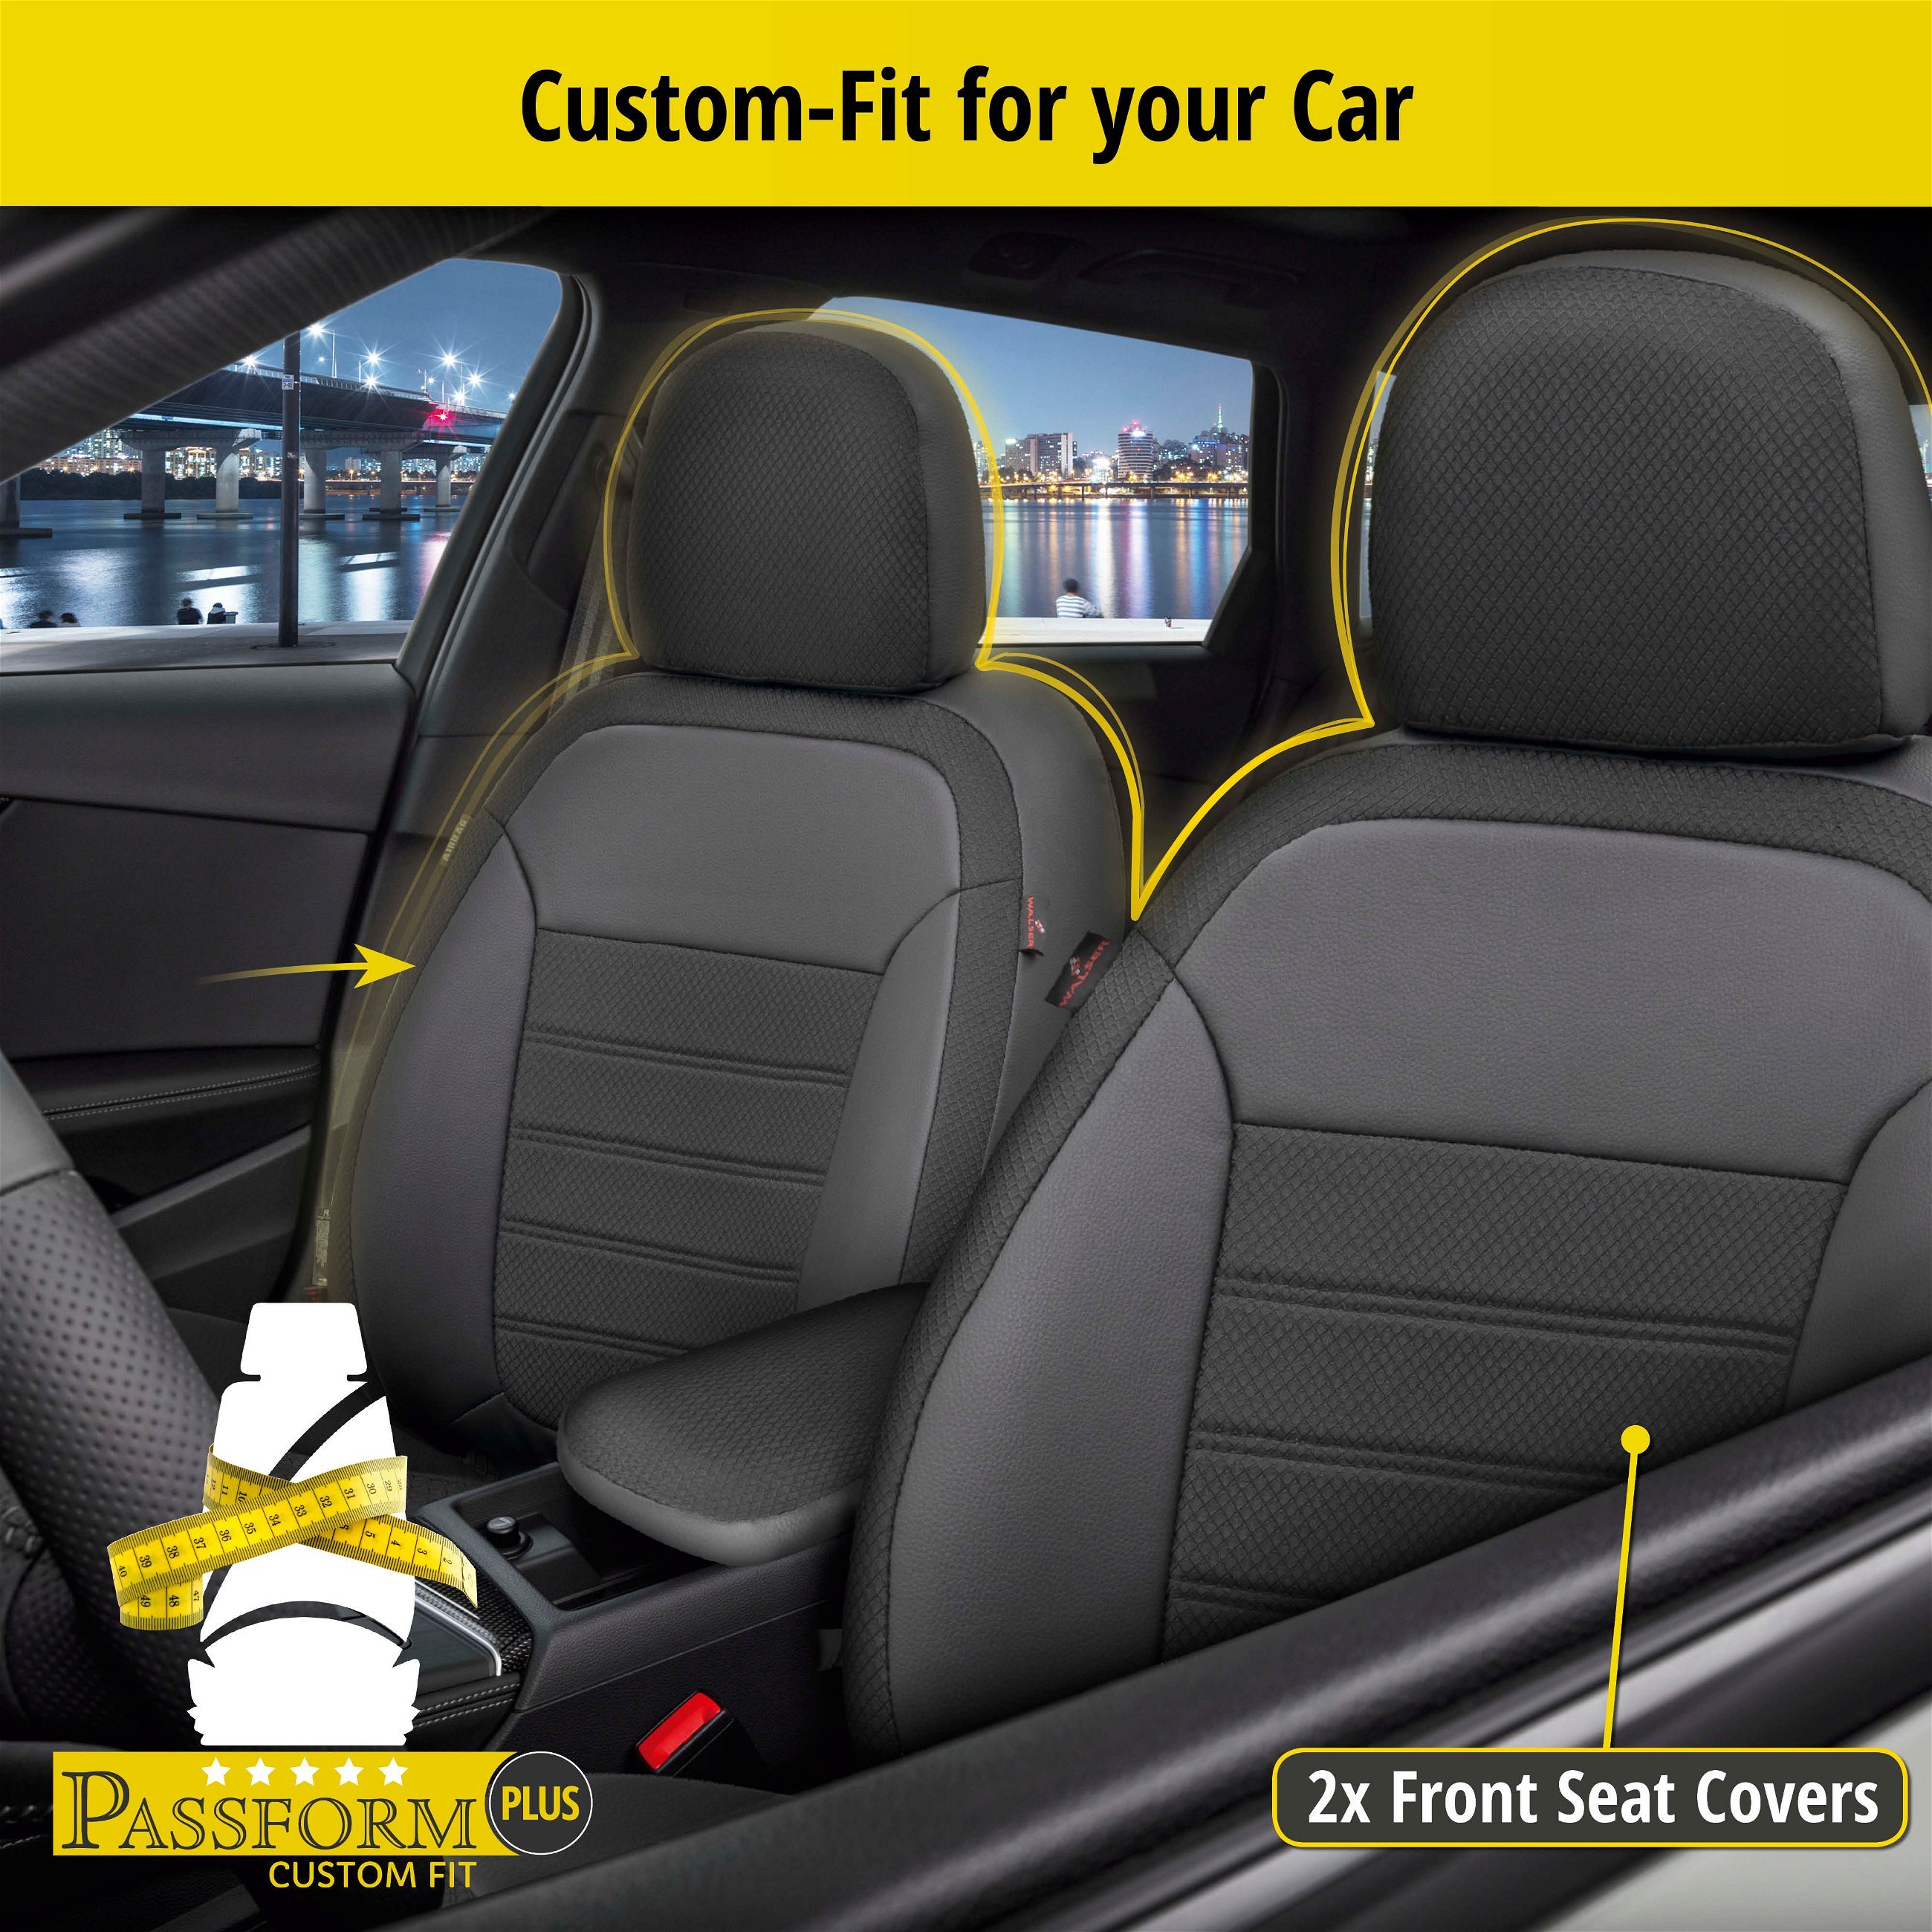 Seat Cover Aversa for Opel Astra 2016-Today, 2 seat covers for normal seats